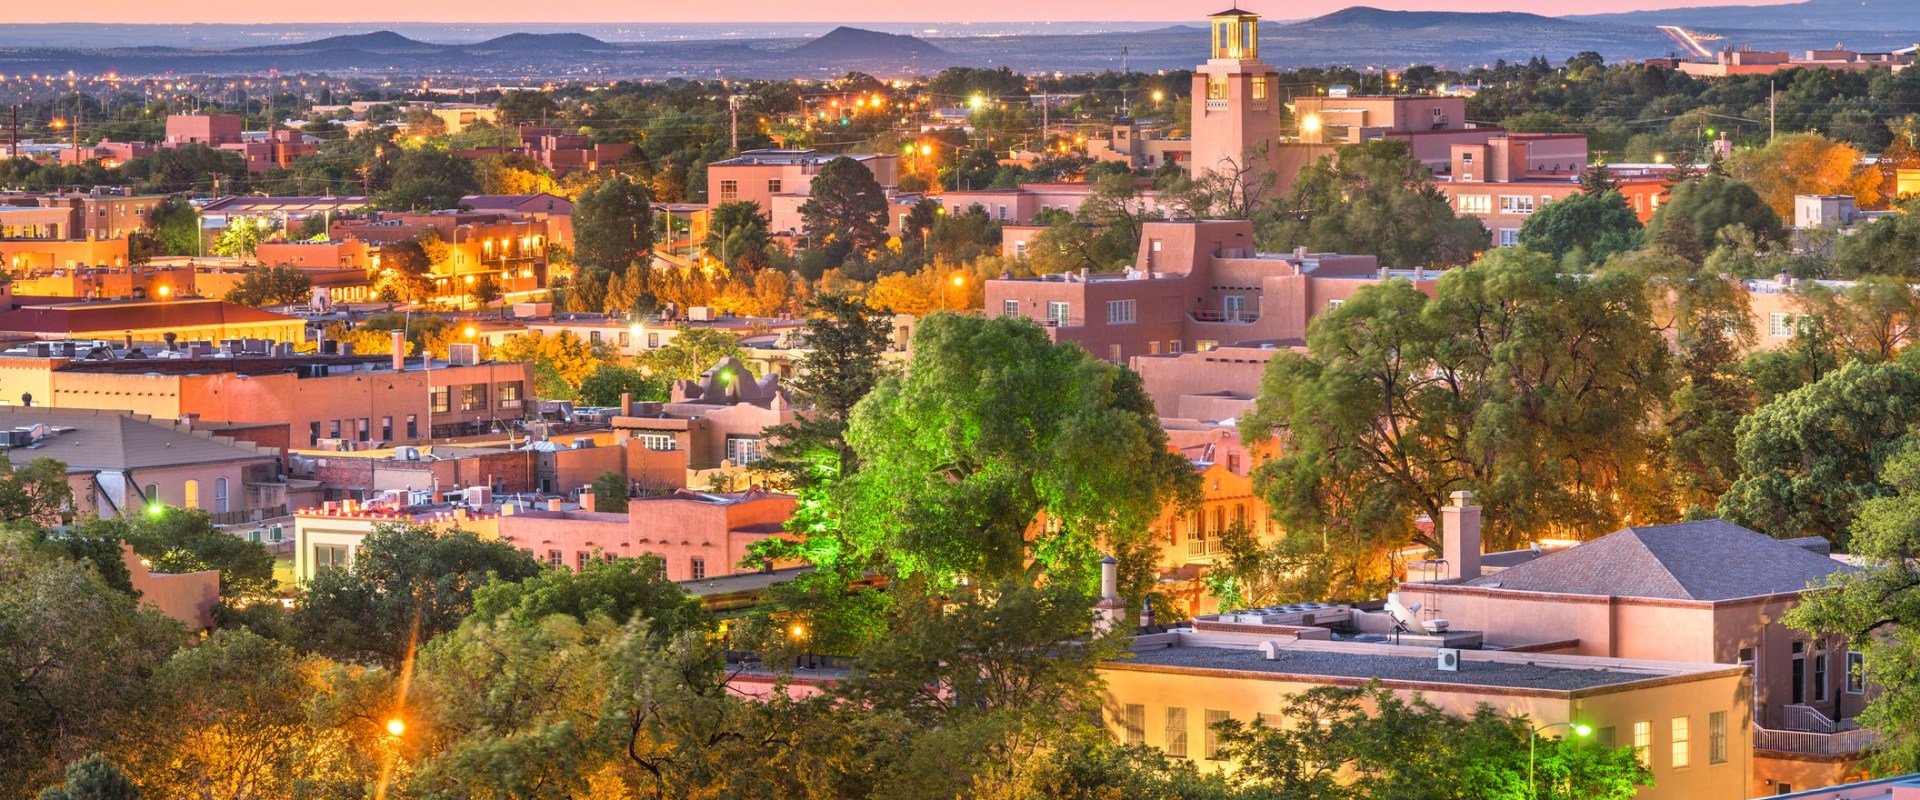 Relocating to Santa Fe: An Overview